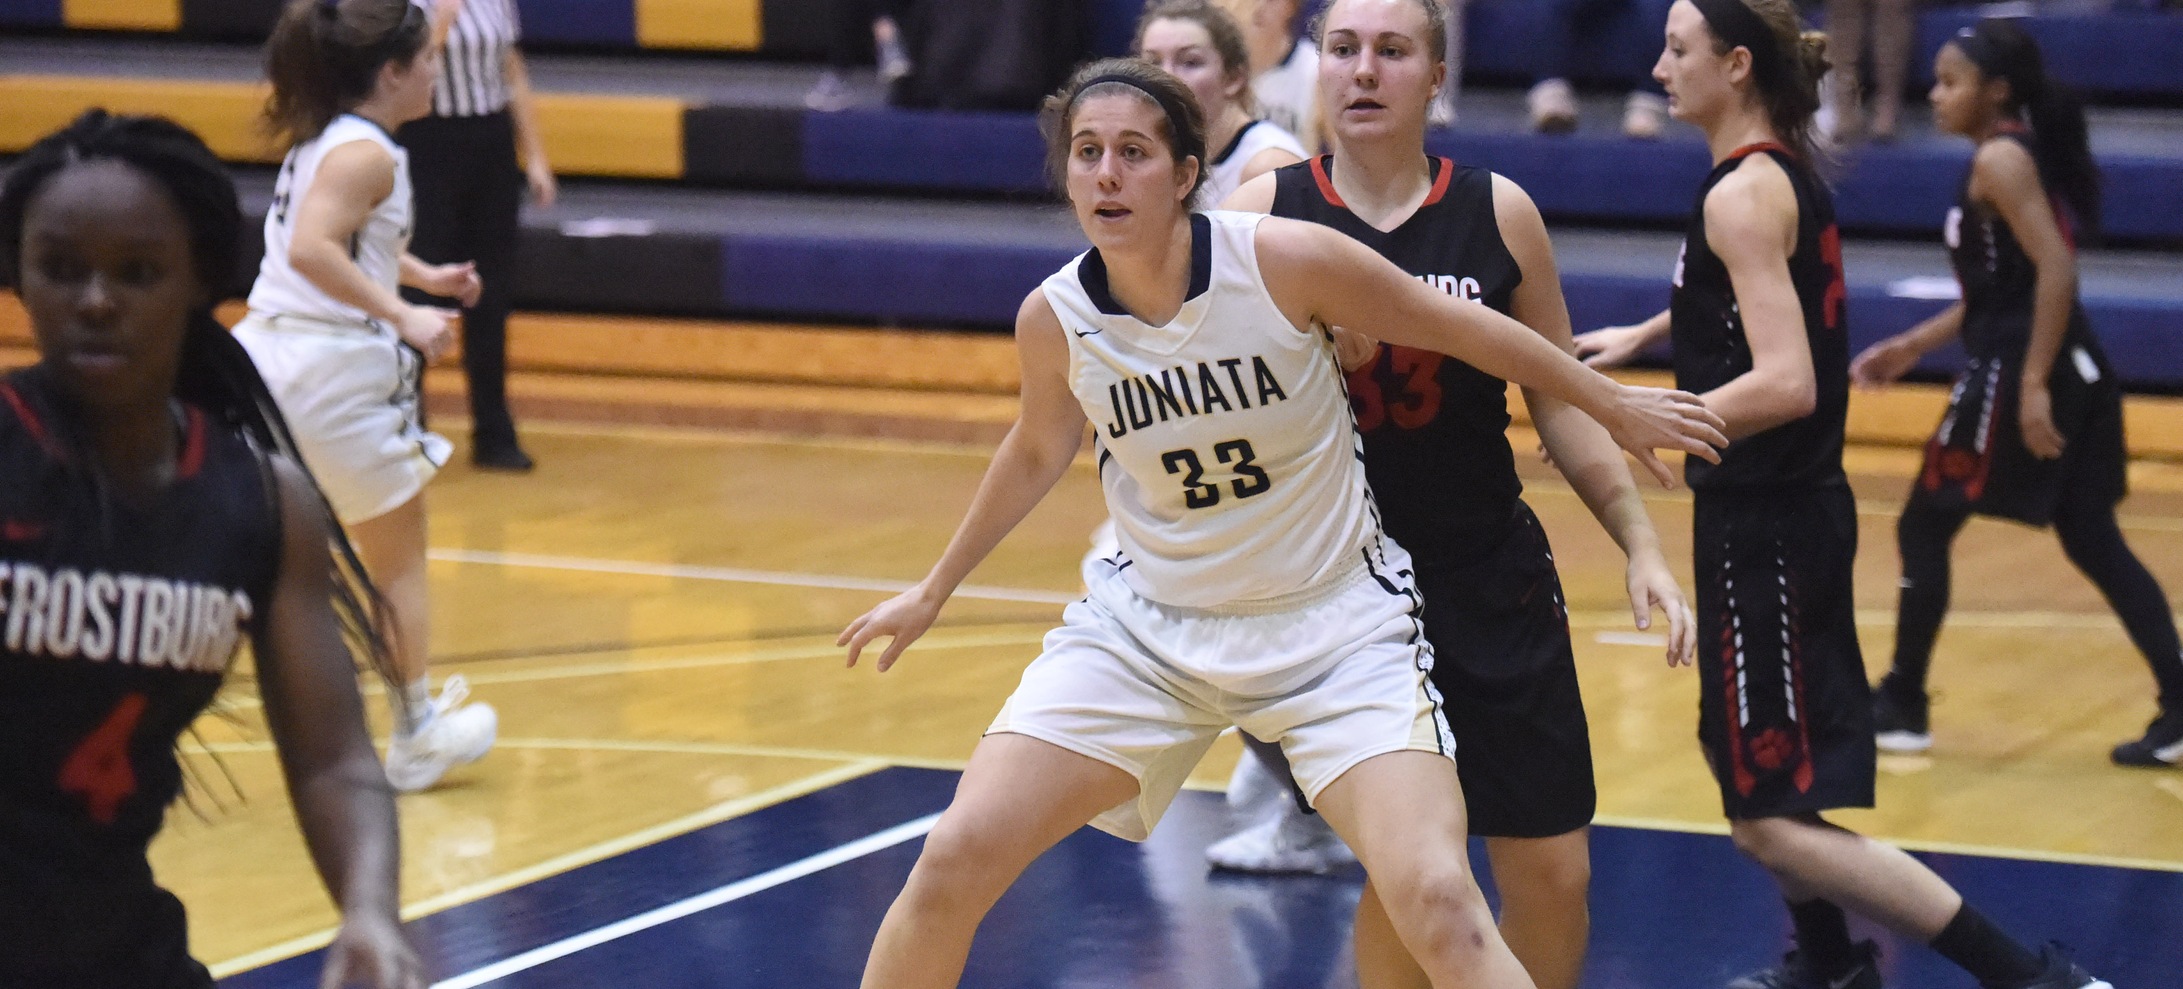 Women's Basketball Ranked 20th in D3hoops.com Poll